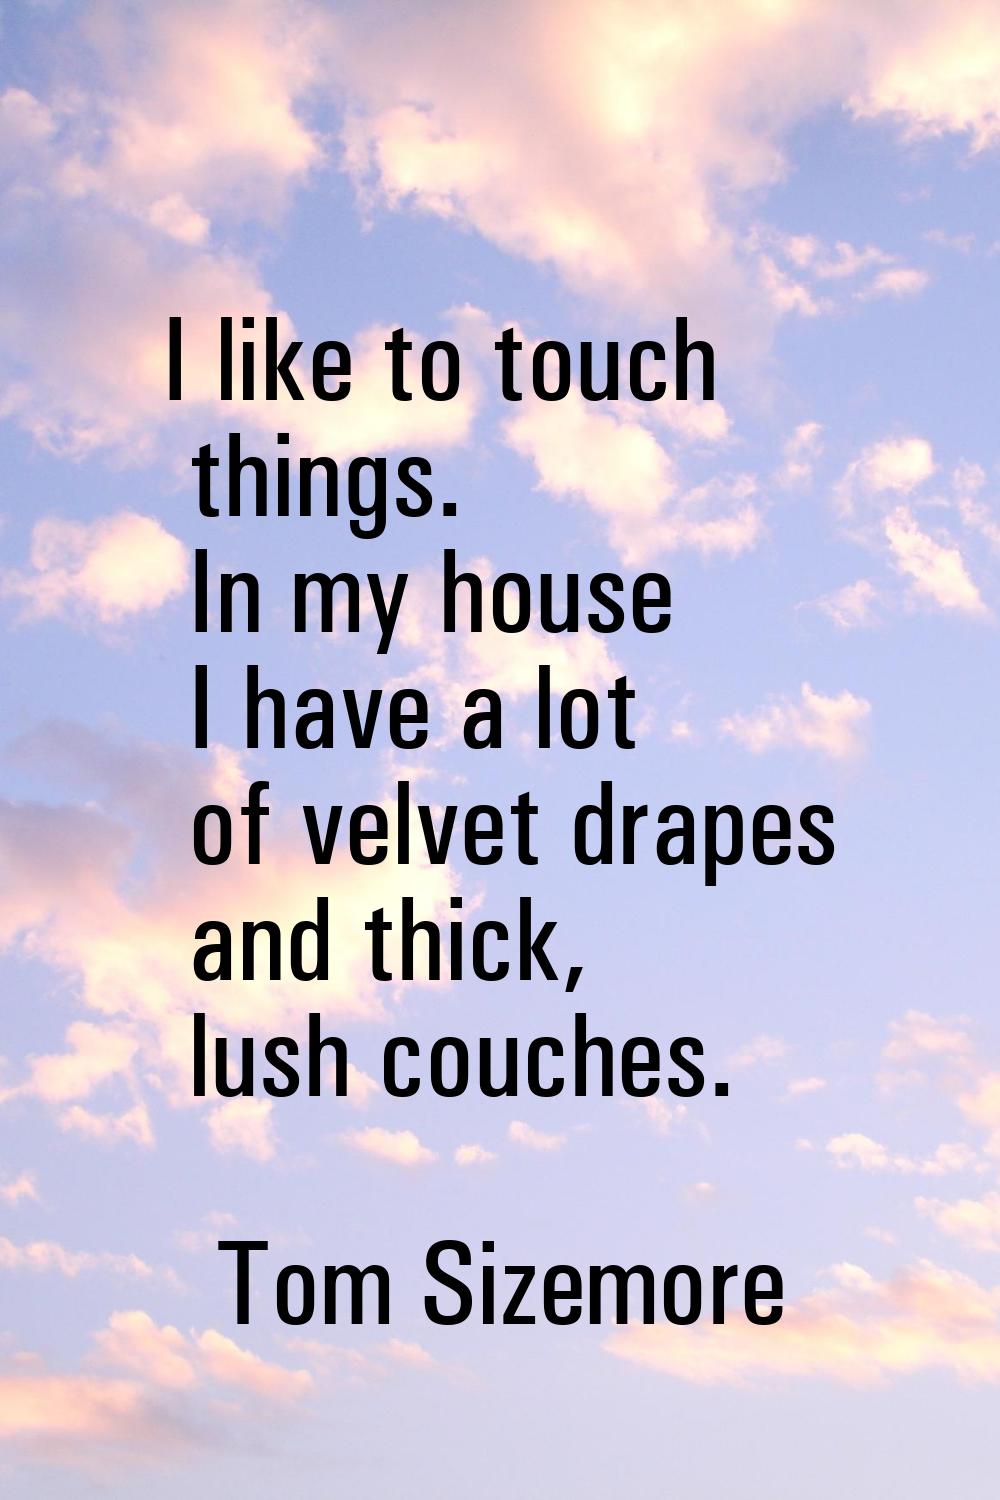 I like to touch things. In my house I have a lot of velvet drapes and thick, lush couches.